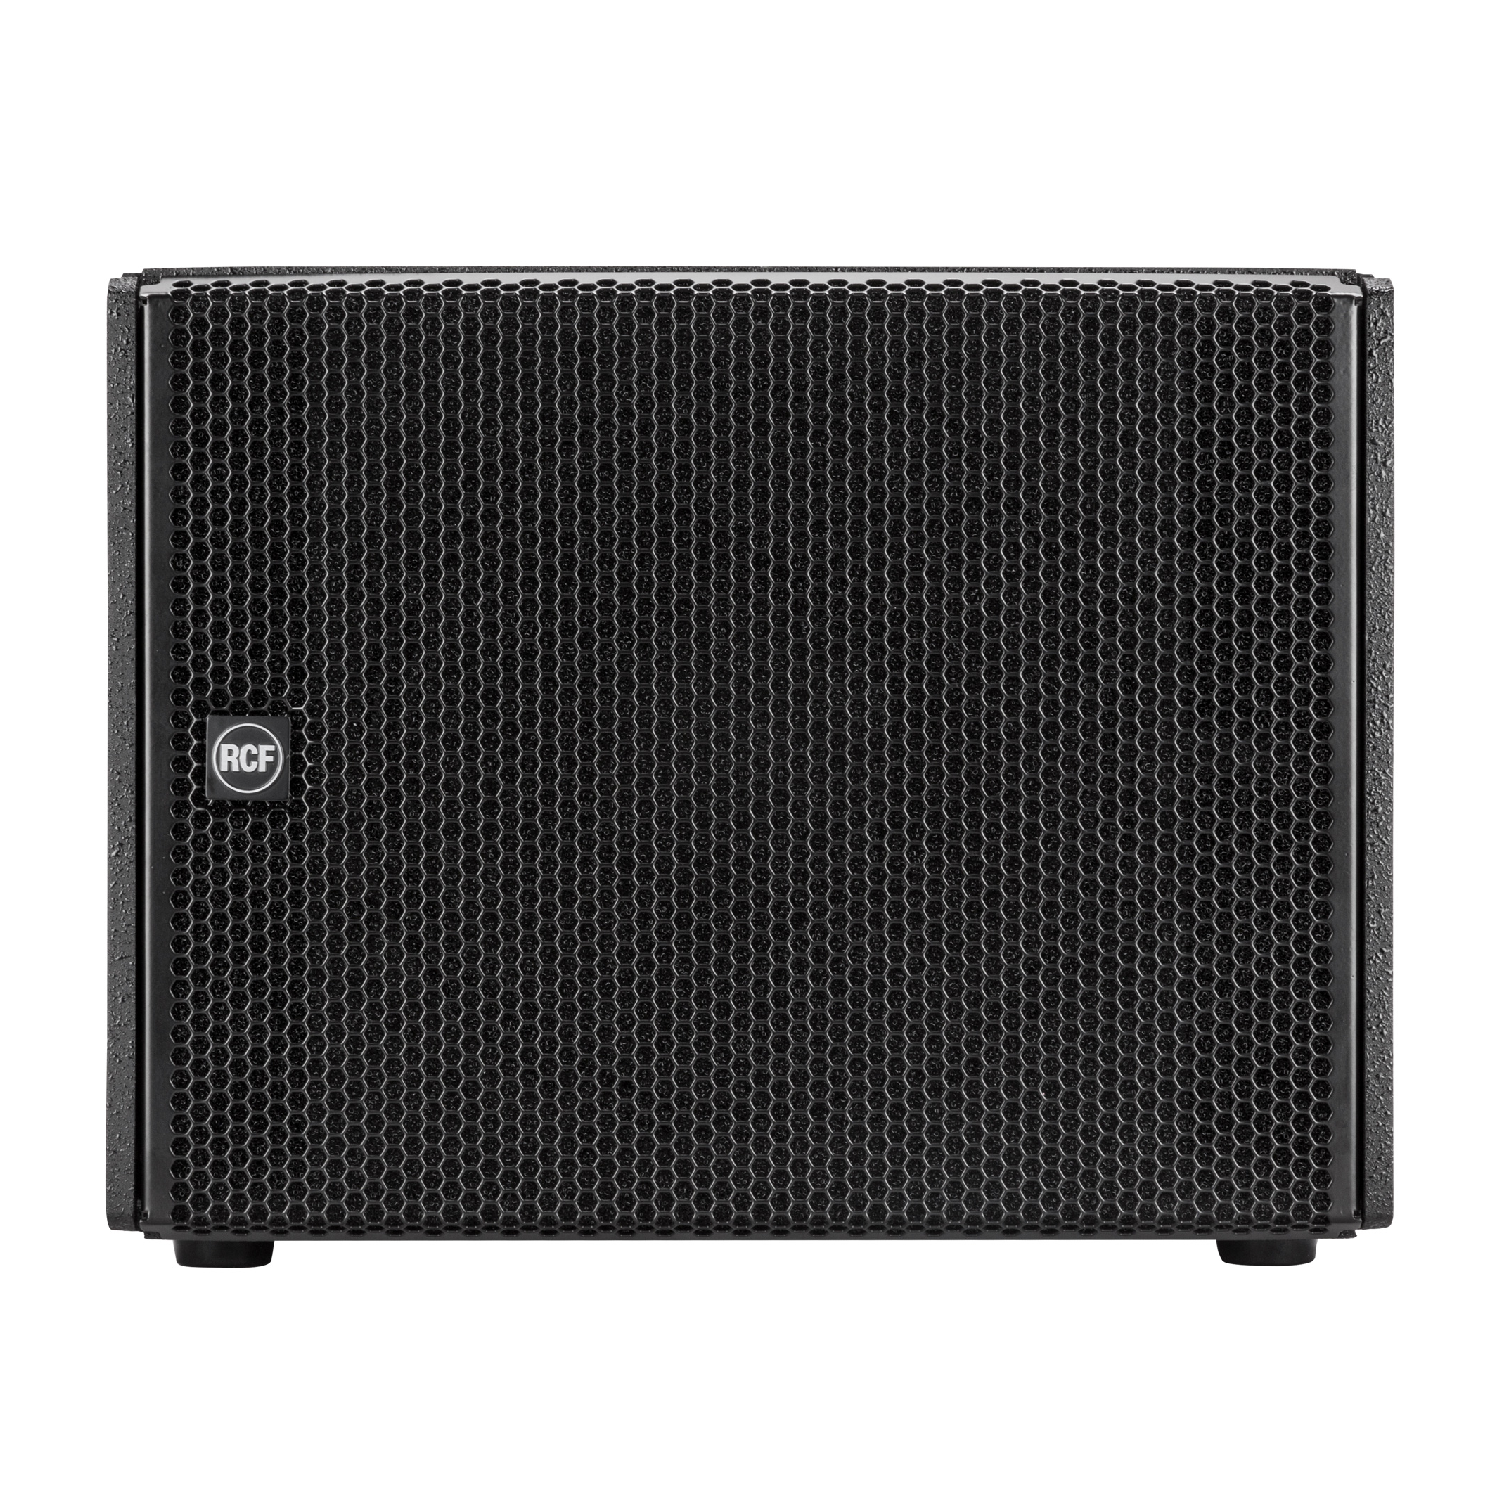 1 x 12 Inches Active Flyable High Power Subwoofer 2000W with DSP Controlled Input   HDL 12AS rcf